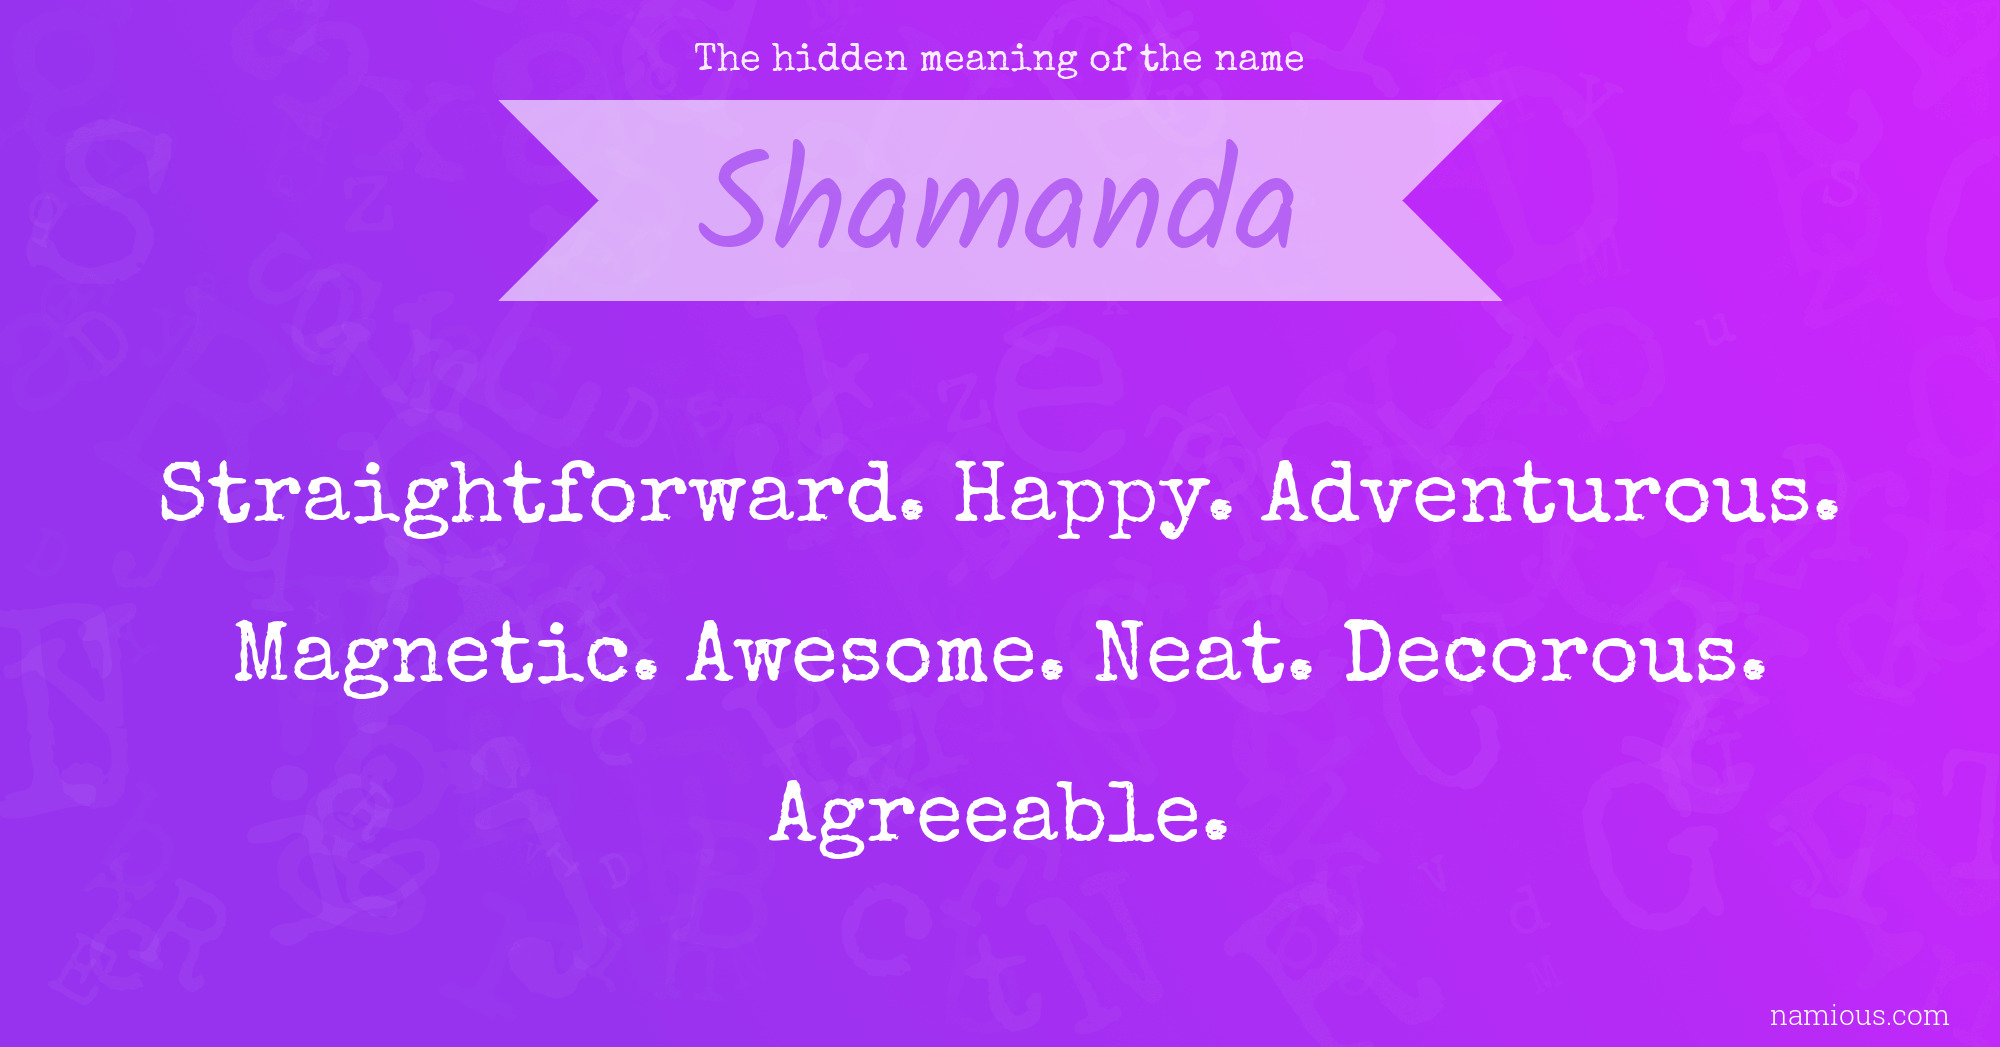 The hidden meaning of the name Shamanda